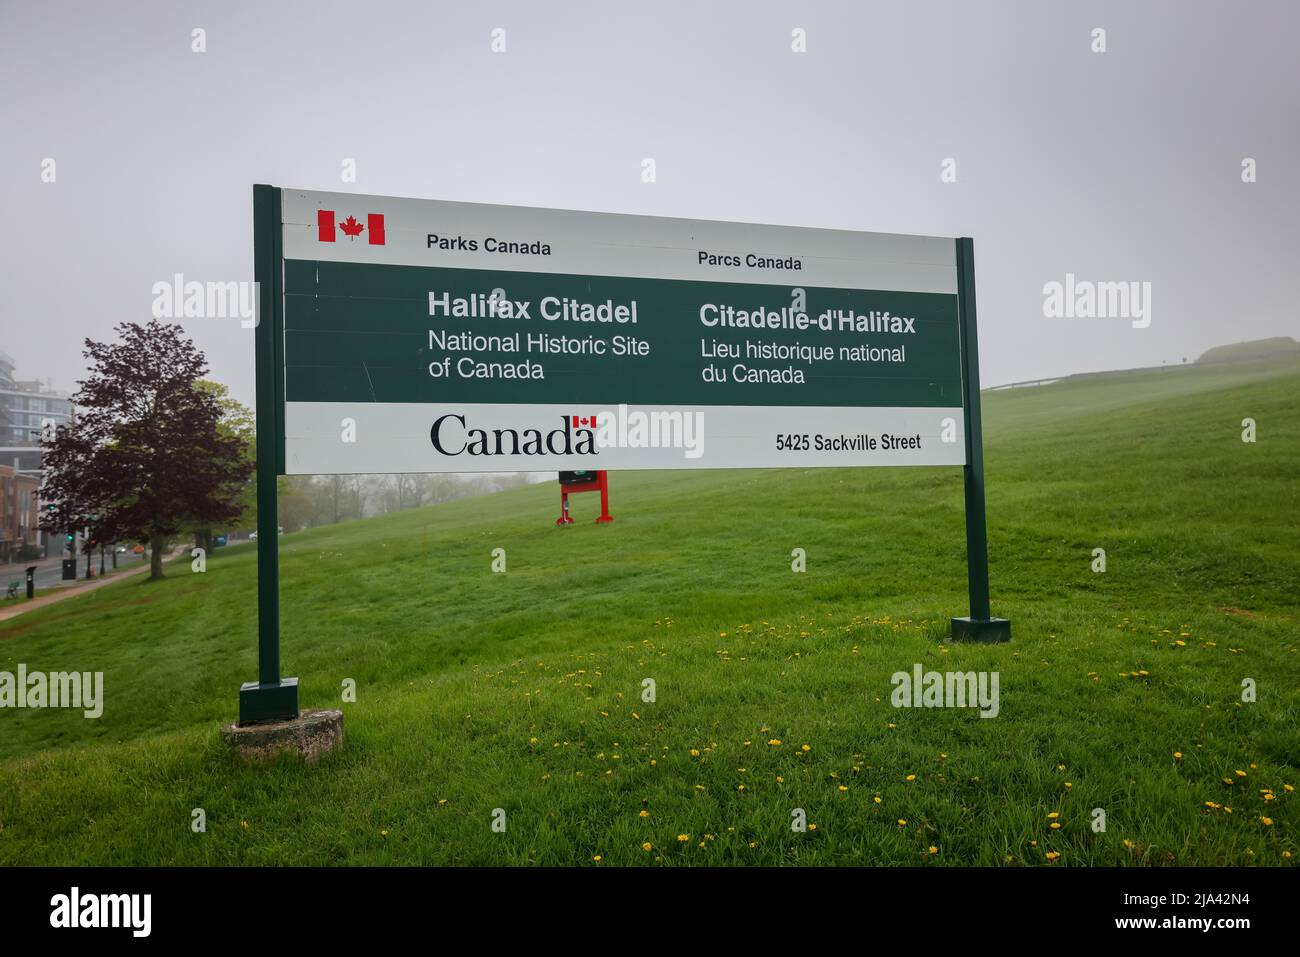 Official Parks Canada Sign Board at Halifax Citadel National Historic Site at the entrance in English and French. HALIFAX, CANADA - MAY 2022: Stock Photo